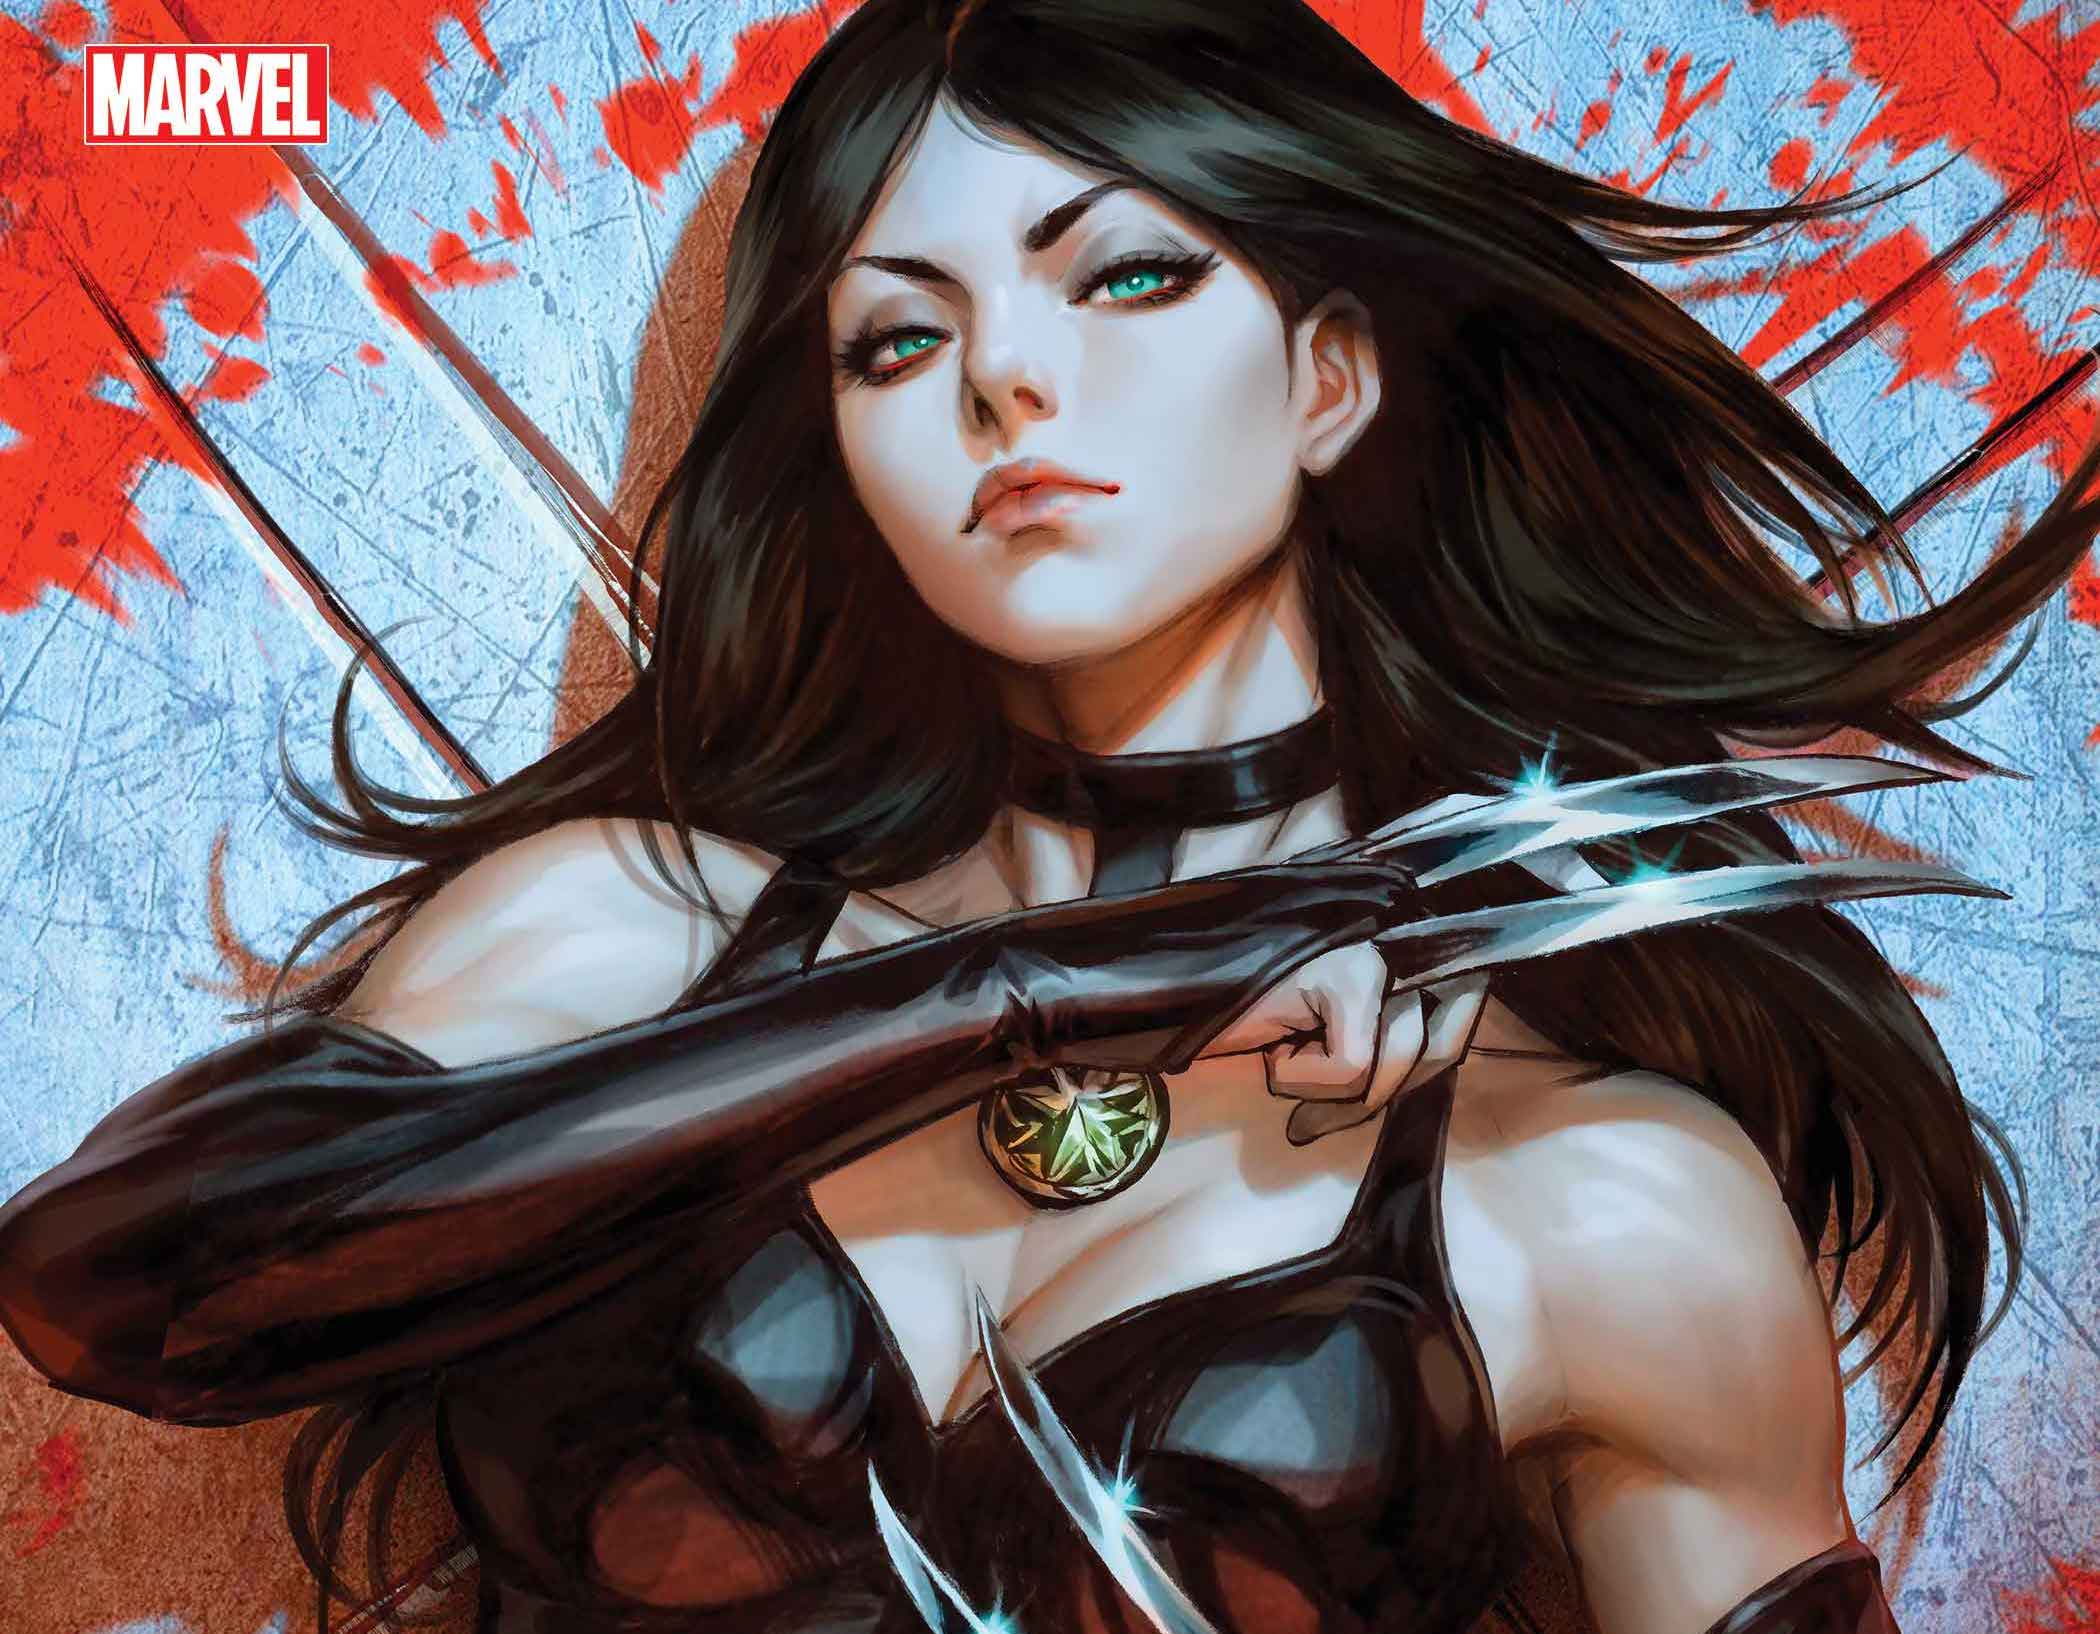 'NYX' #1 variant covers highlights Wolverine